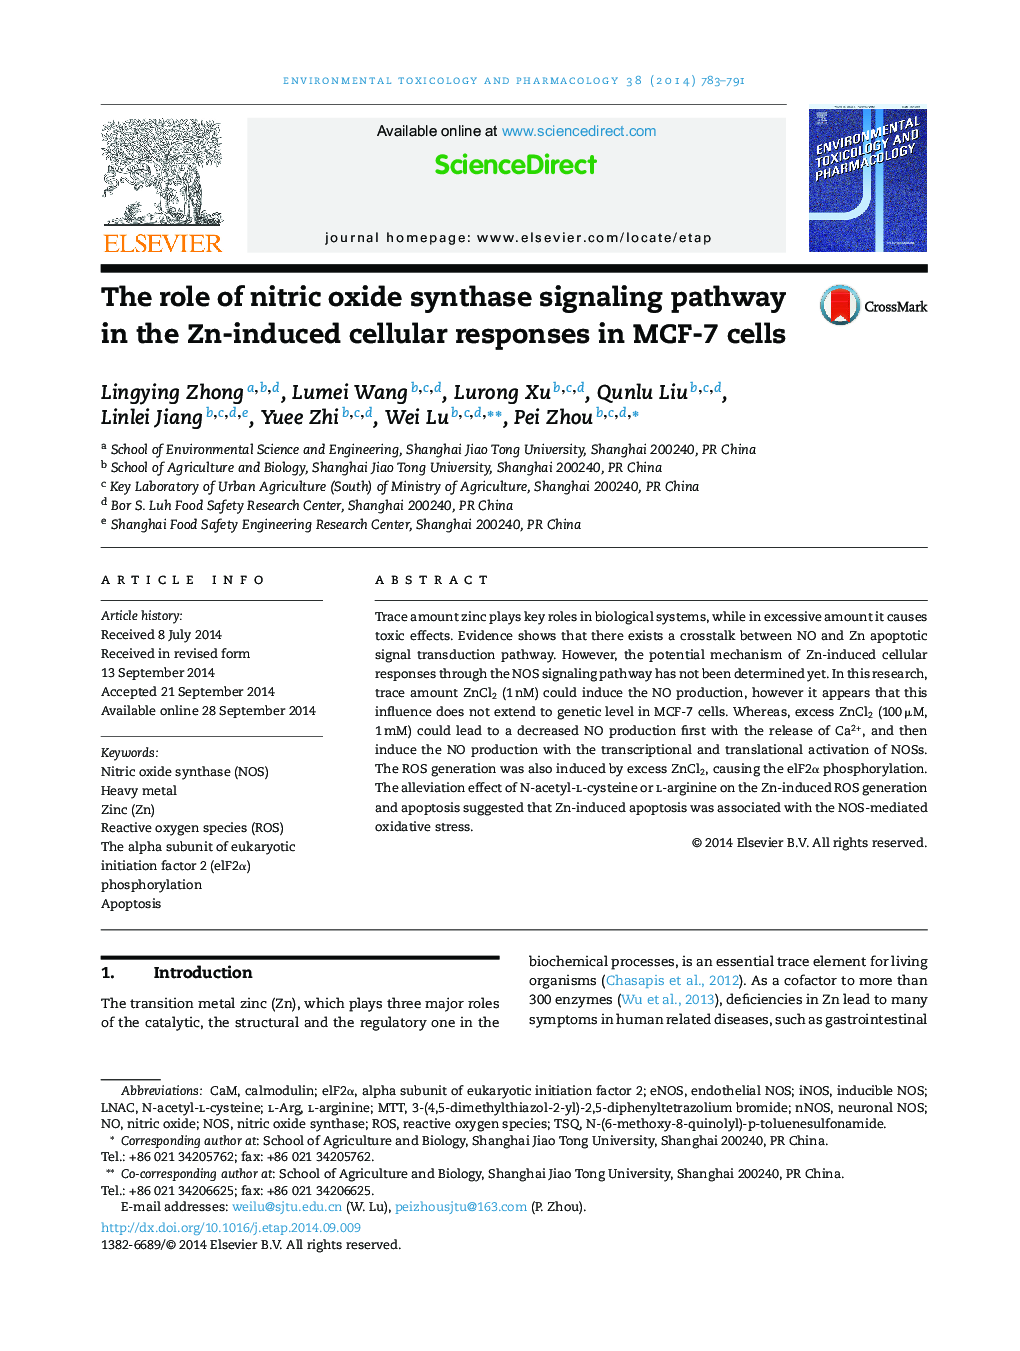 The role of nitric oxide synthase signaling pathway in the Zn-induced cellular responses in MCF-7 cells